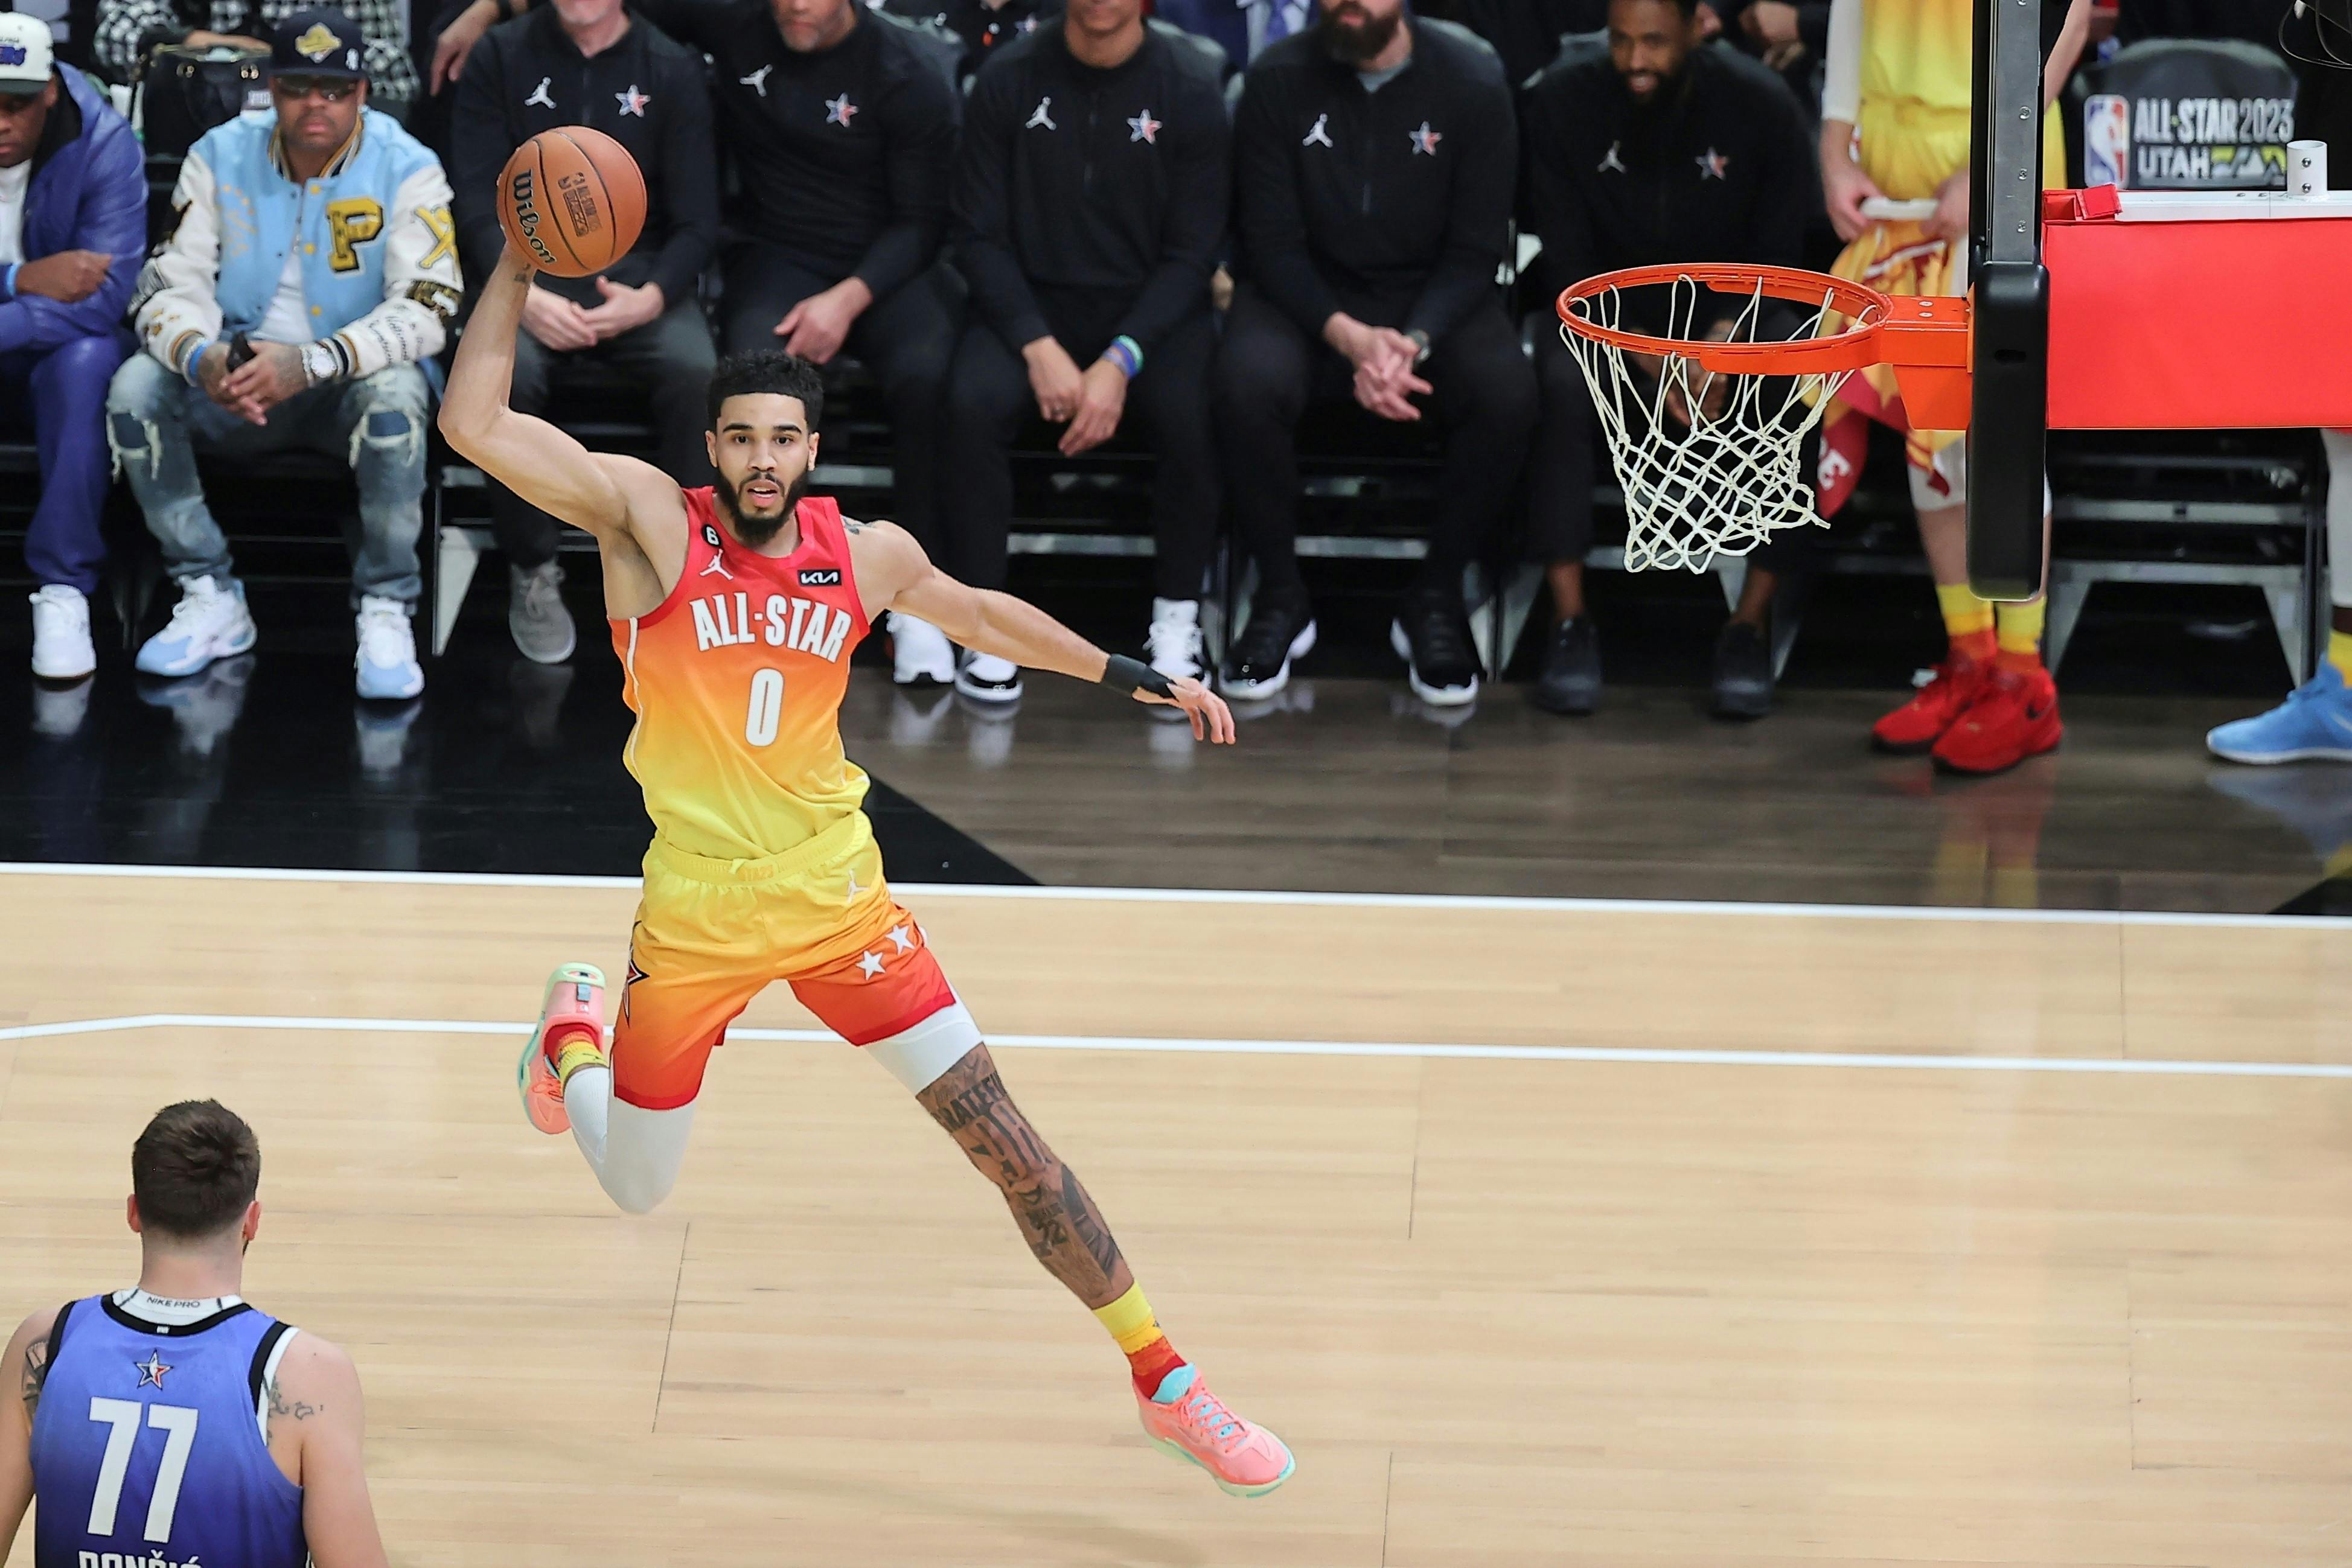 New shoes, new record, new trophy: Jayson Tatum debuts first Jordan signature shoes in NBA All-Star Game